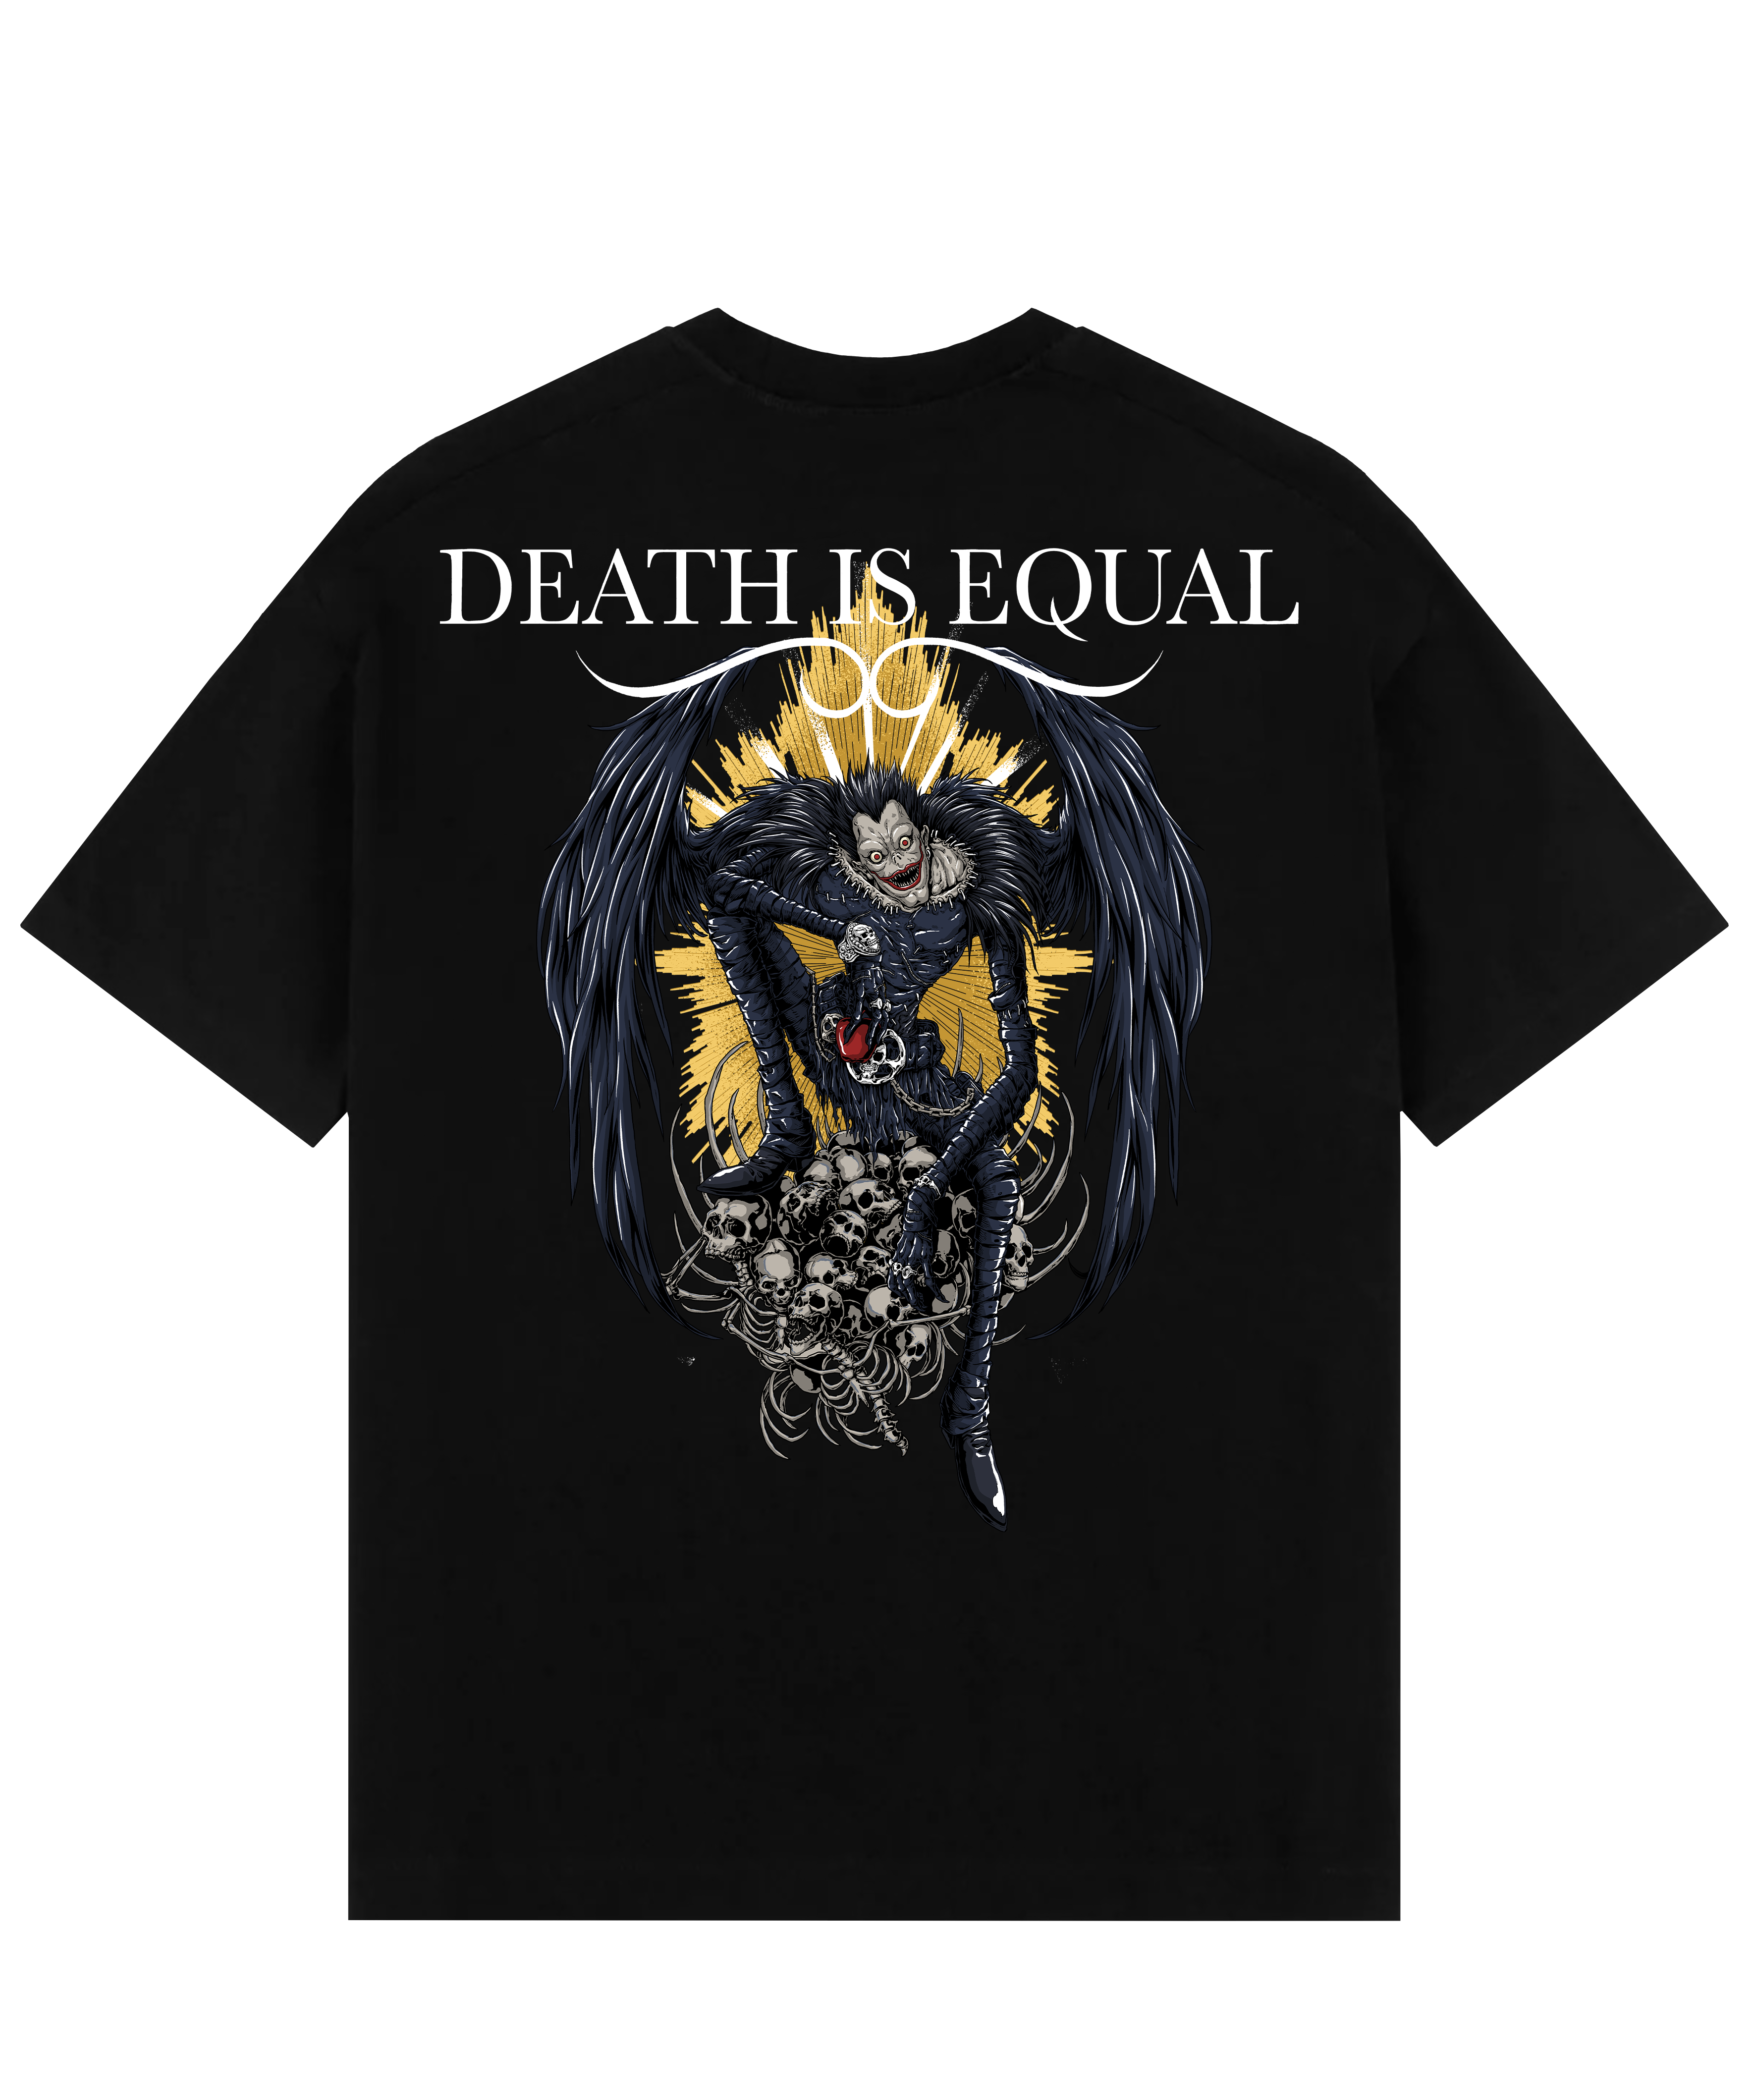 "Ryuk X Death Is Equal - Death Note" T-shirt oversize